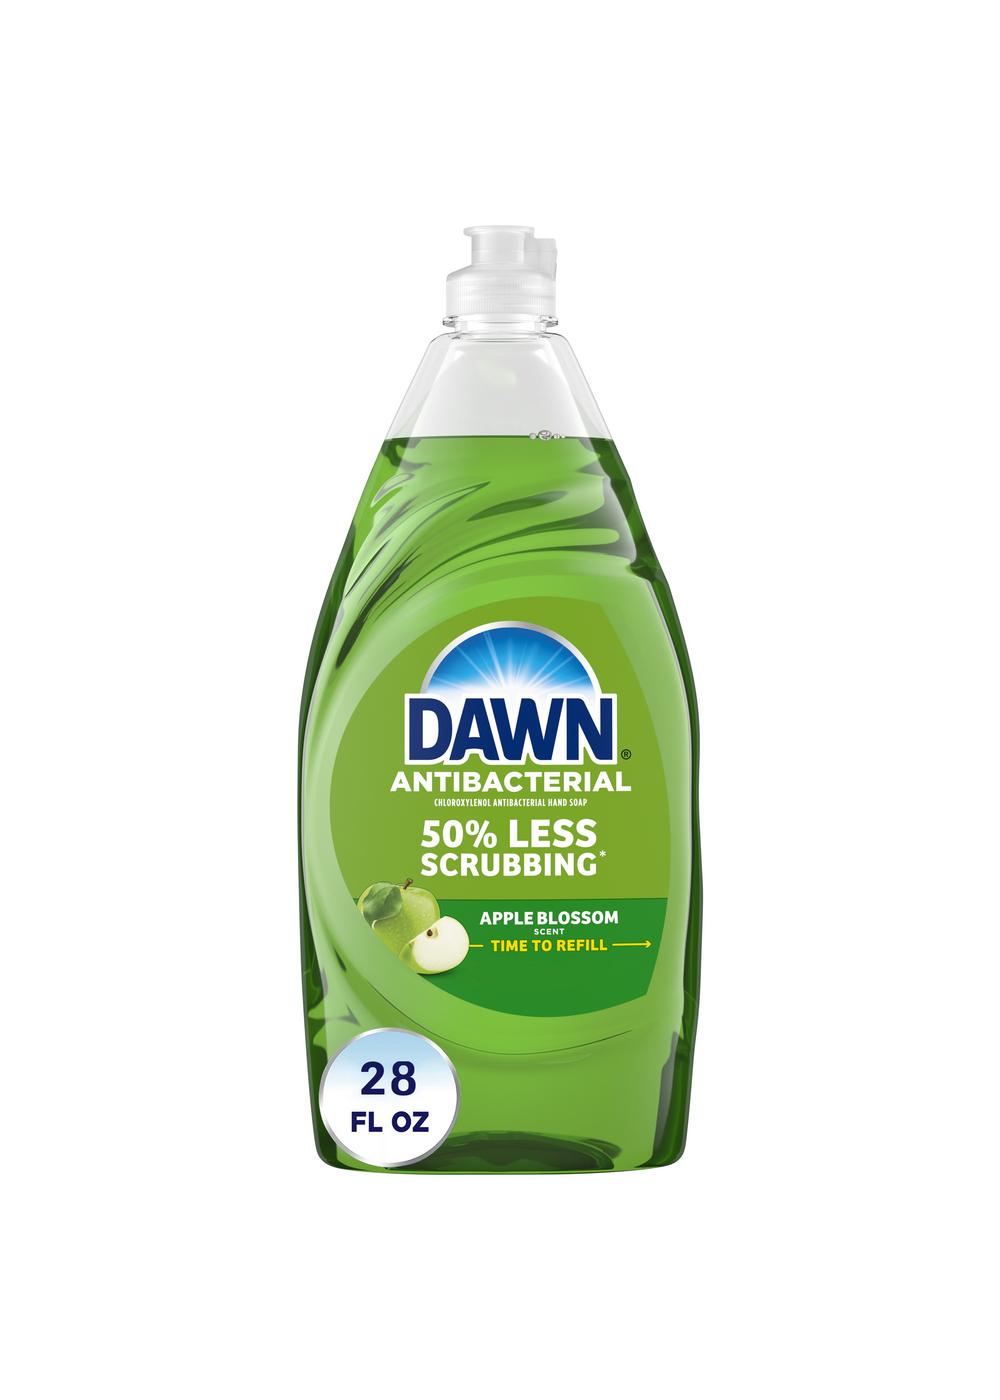 Dawn Ultra Antibacterial Hand Soap - Apple Blossom; image 1 of 6